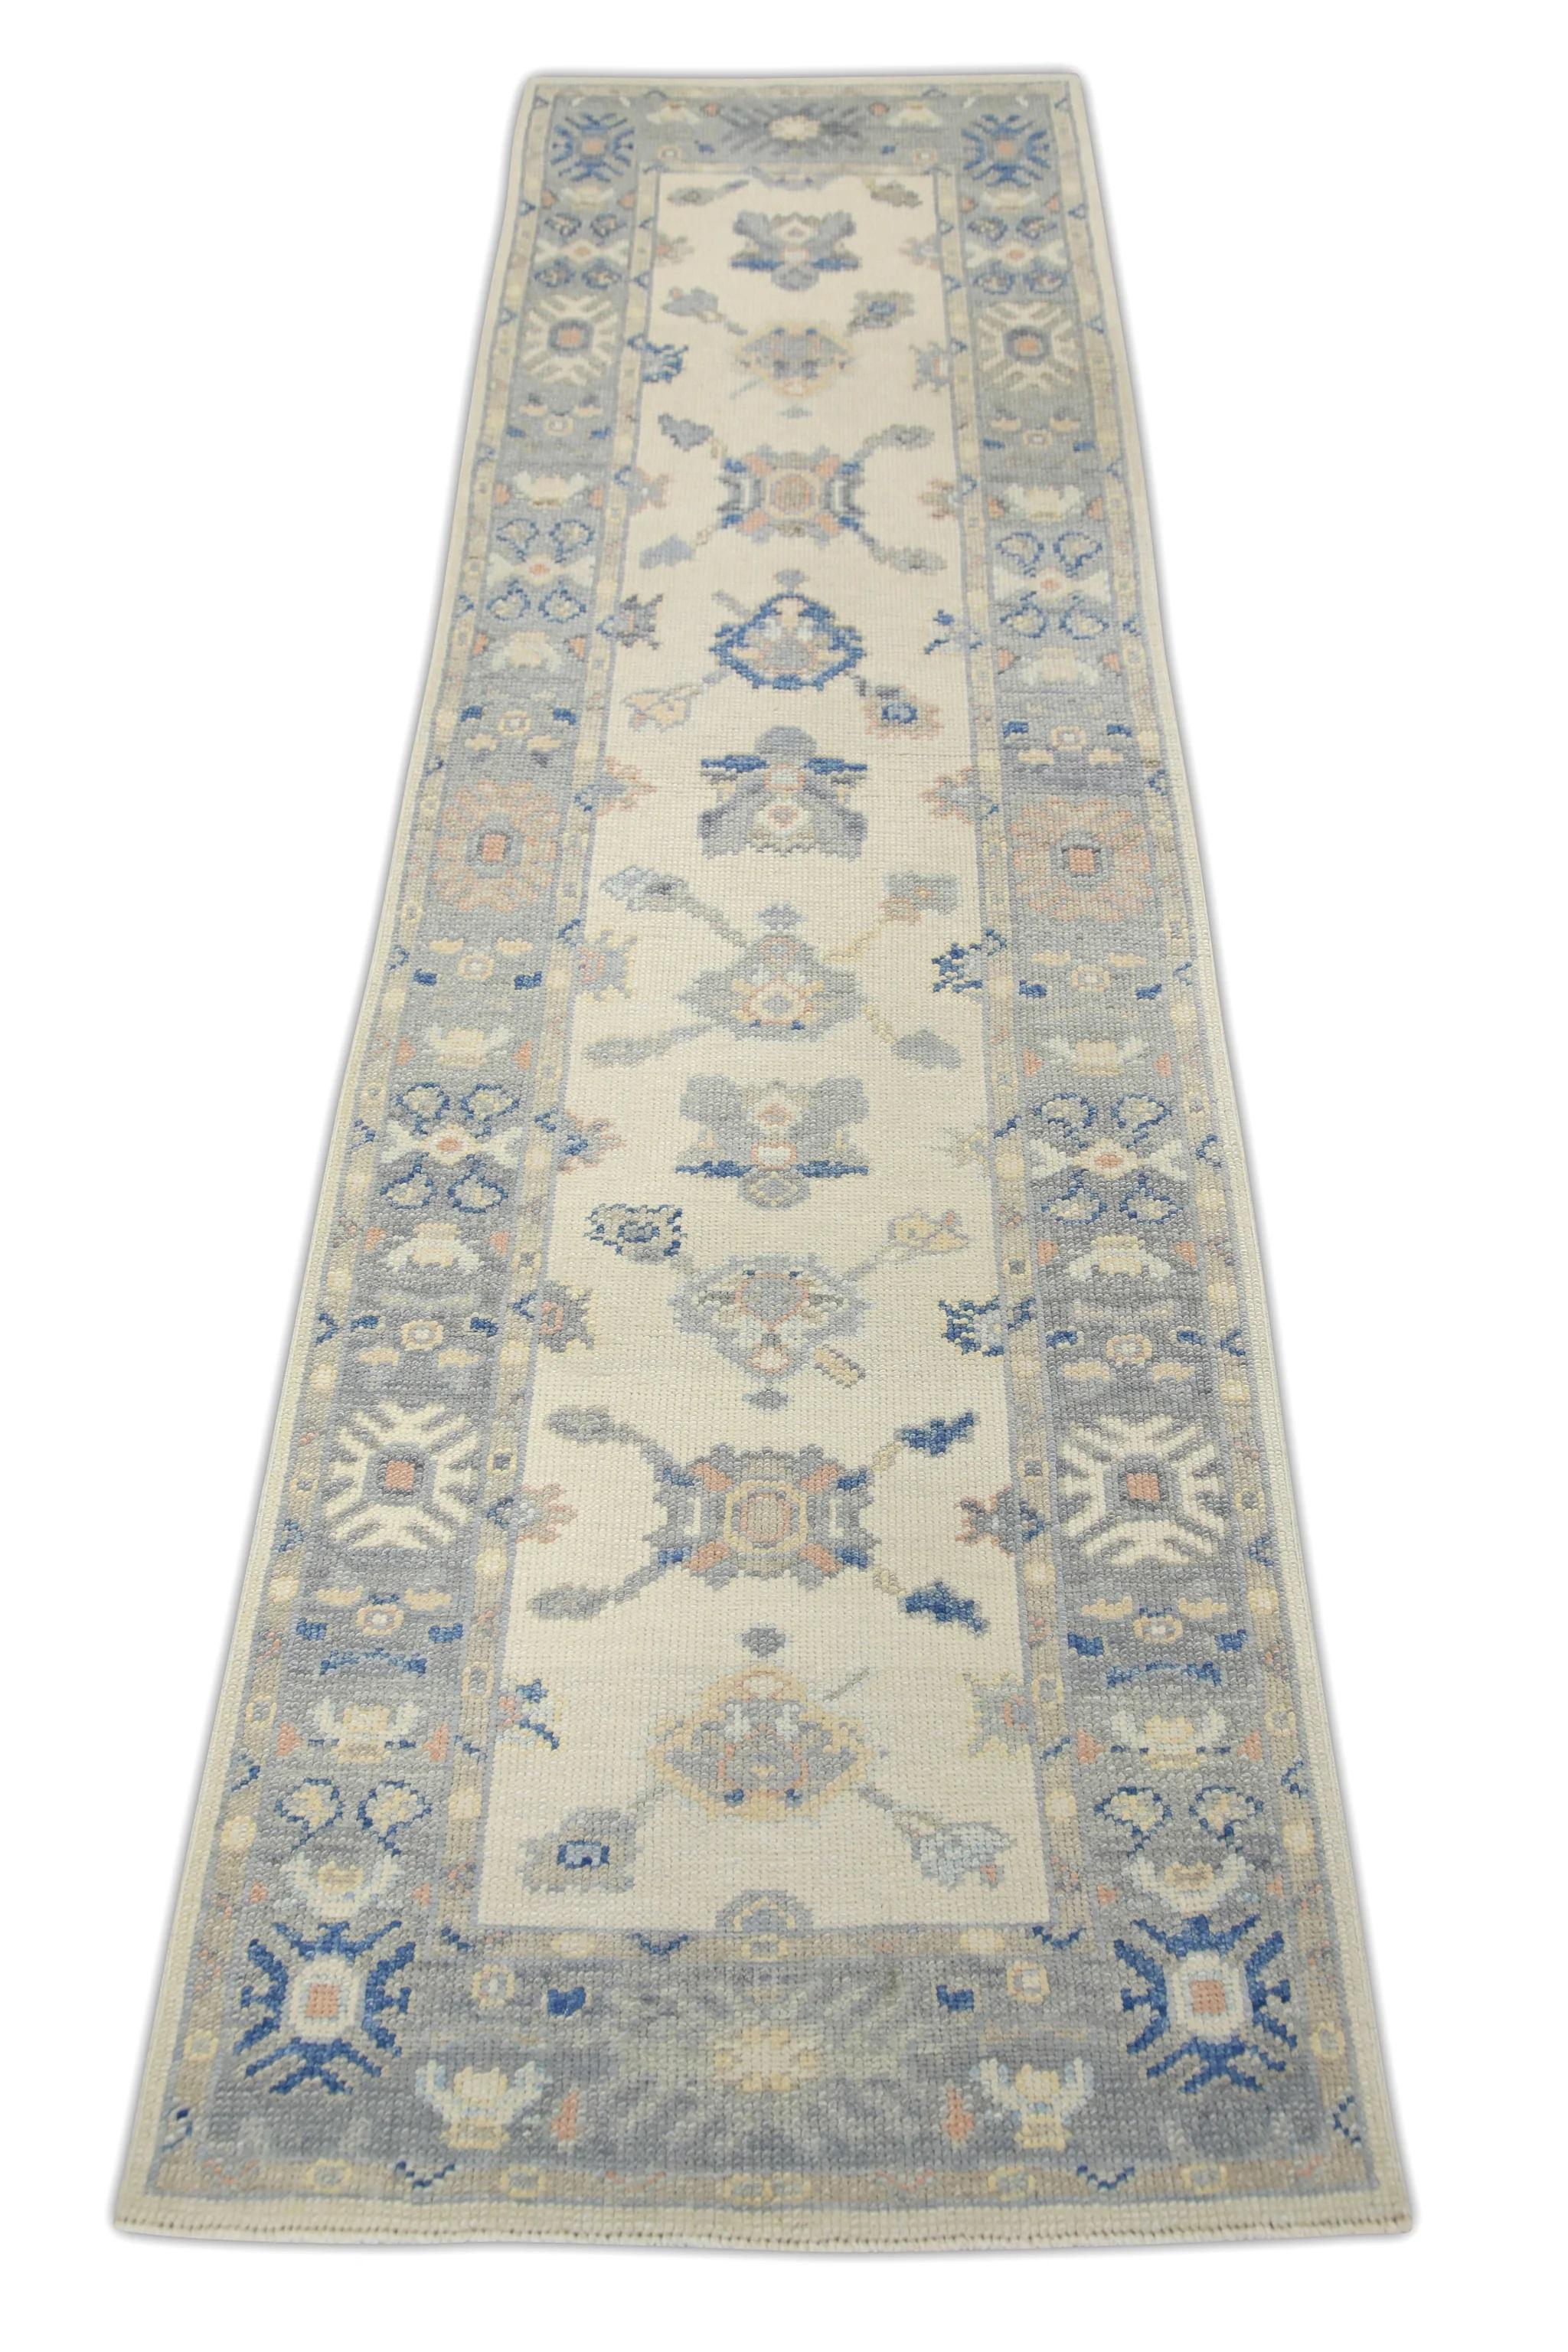 Contemporary Cream Handwoven Wool Turkish Oushak Rug in Blue Floral Pattern 2'6